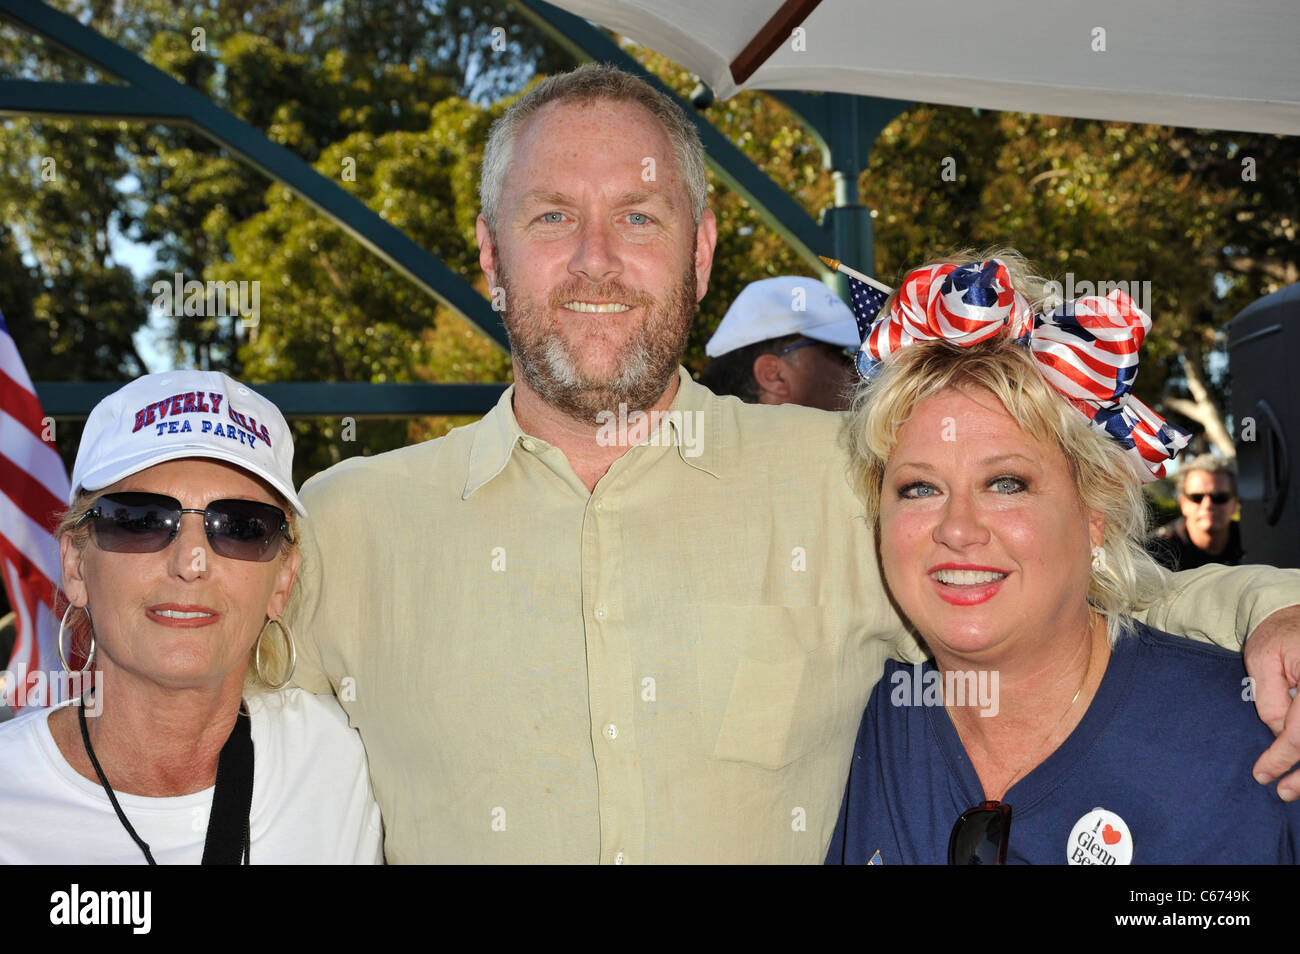 guest, Andrew Breitbart, Victoria Jackson at a public appearance for Beverly Hills Tea Party Rally, Beverly Hills Park, Los Angeles, CA September 26, 2010. Photo By: Robert Kenney/Everett Collection Stock Photo